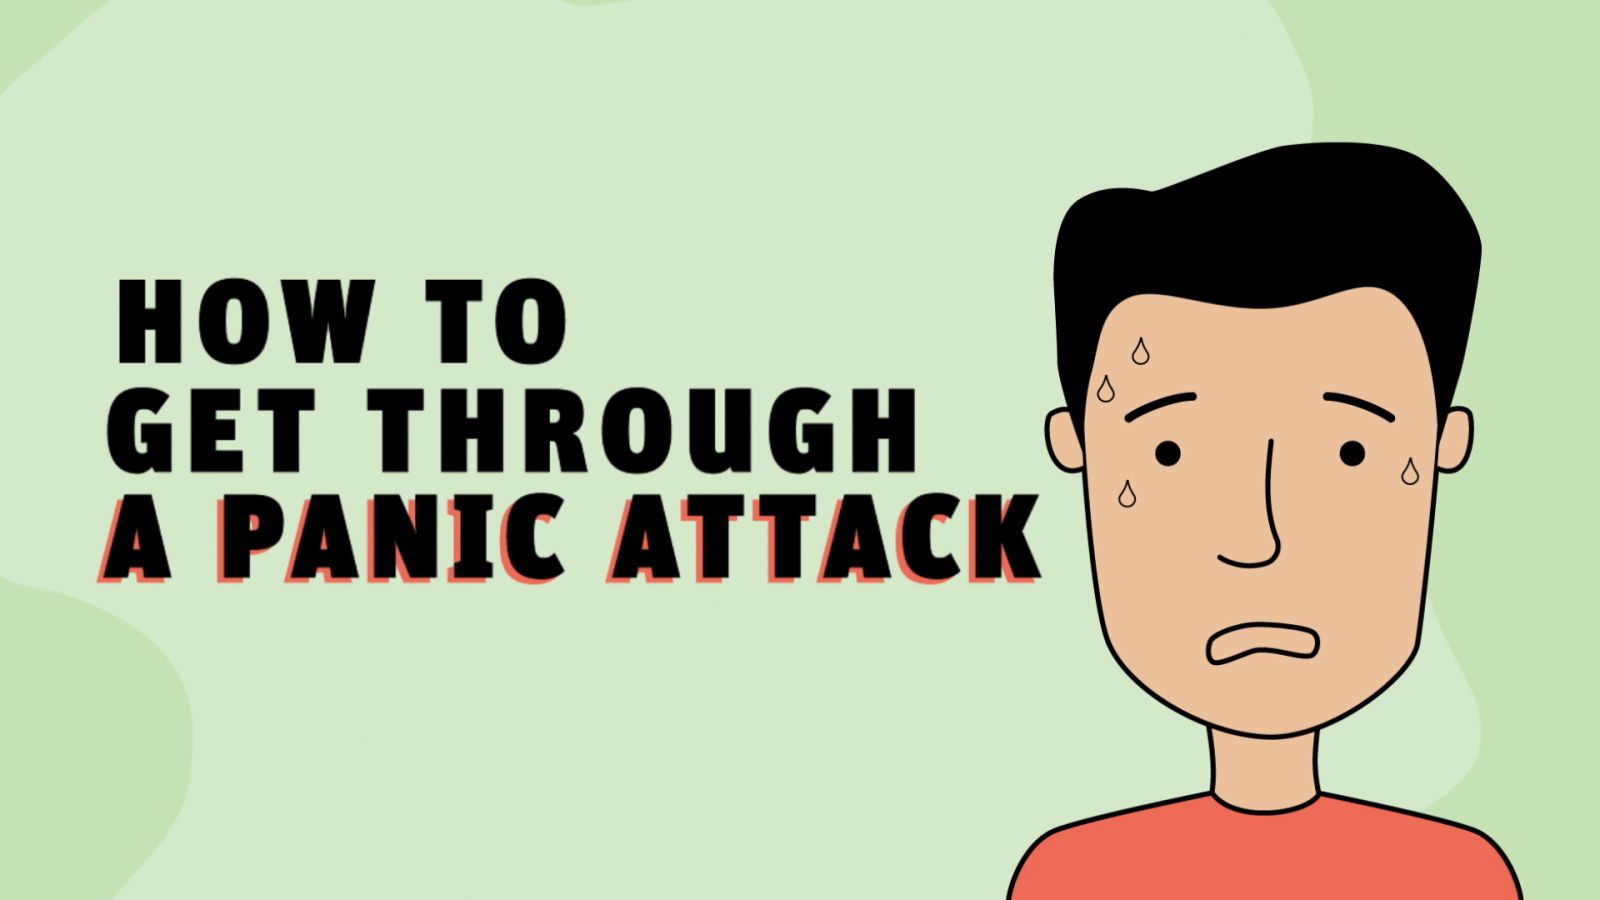 How to Get Through a Panic Attack